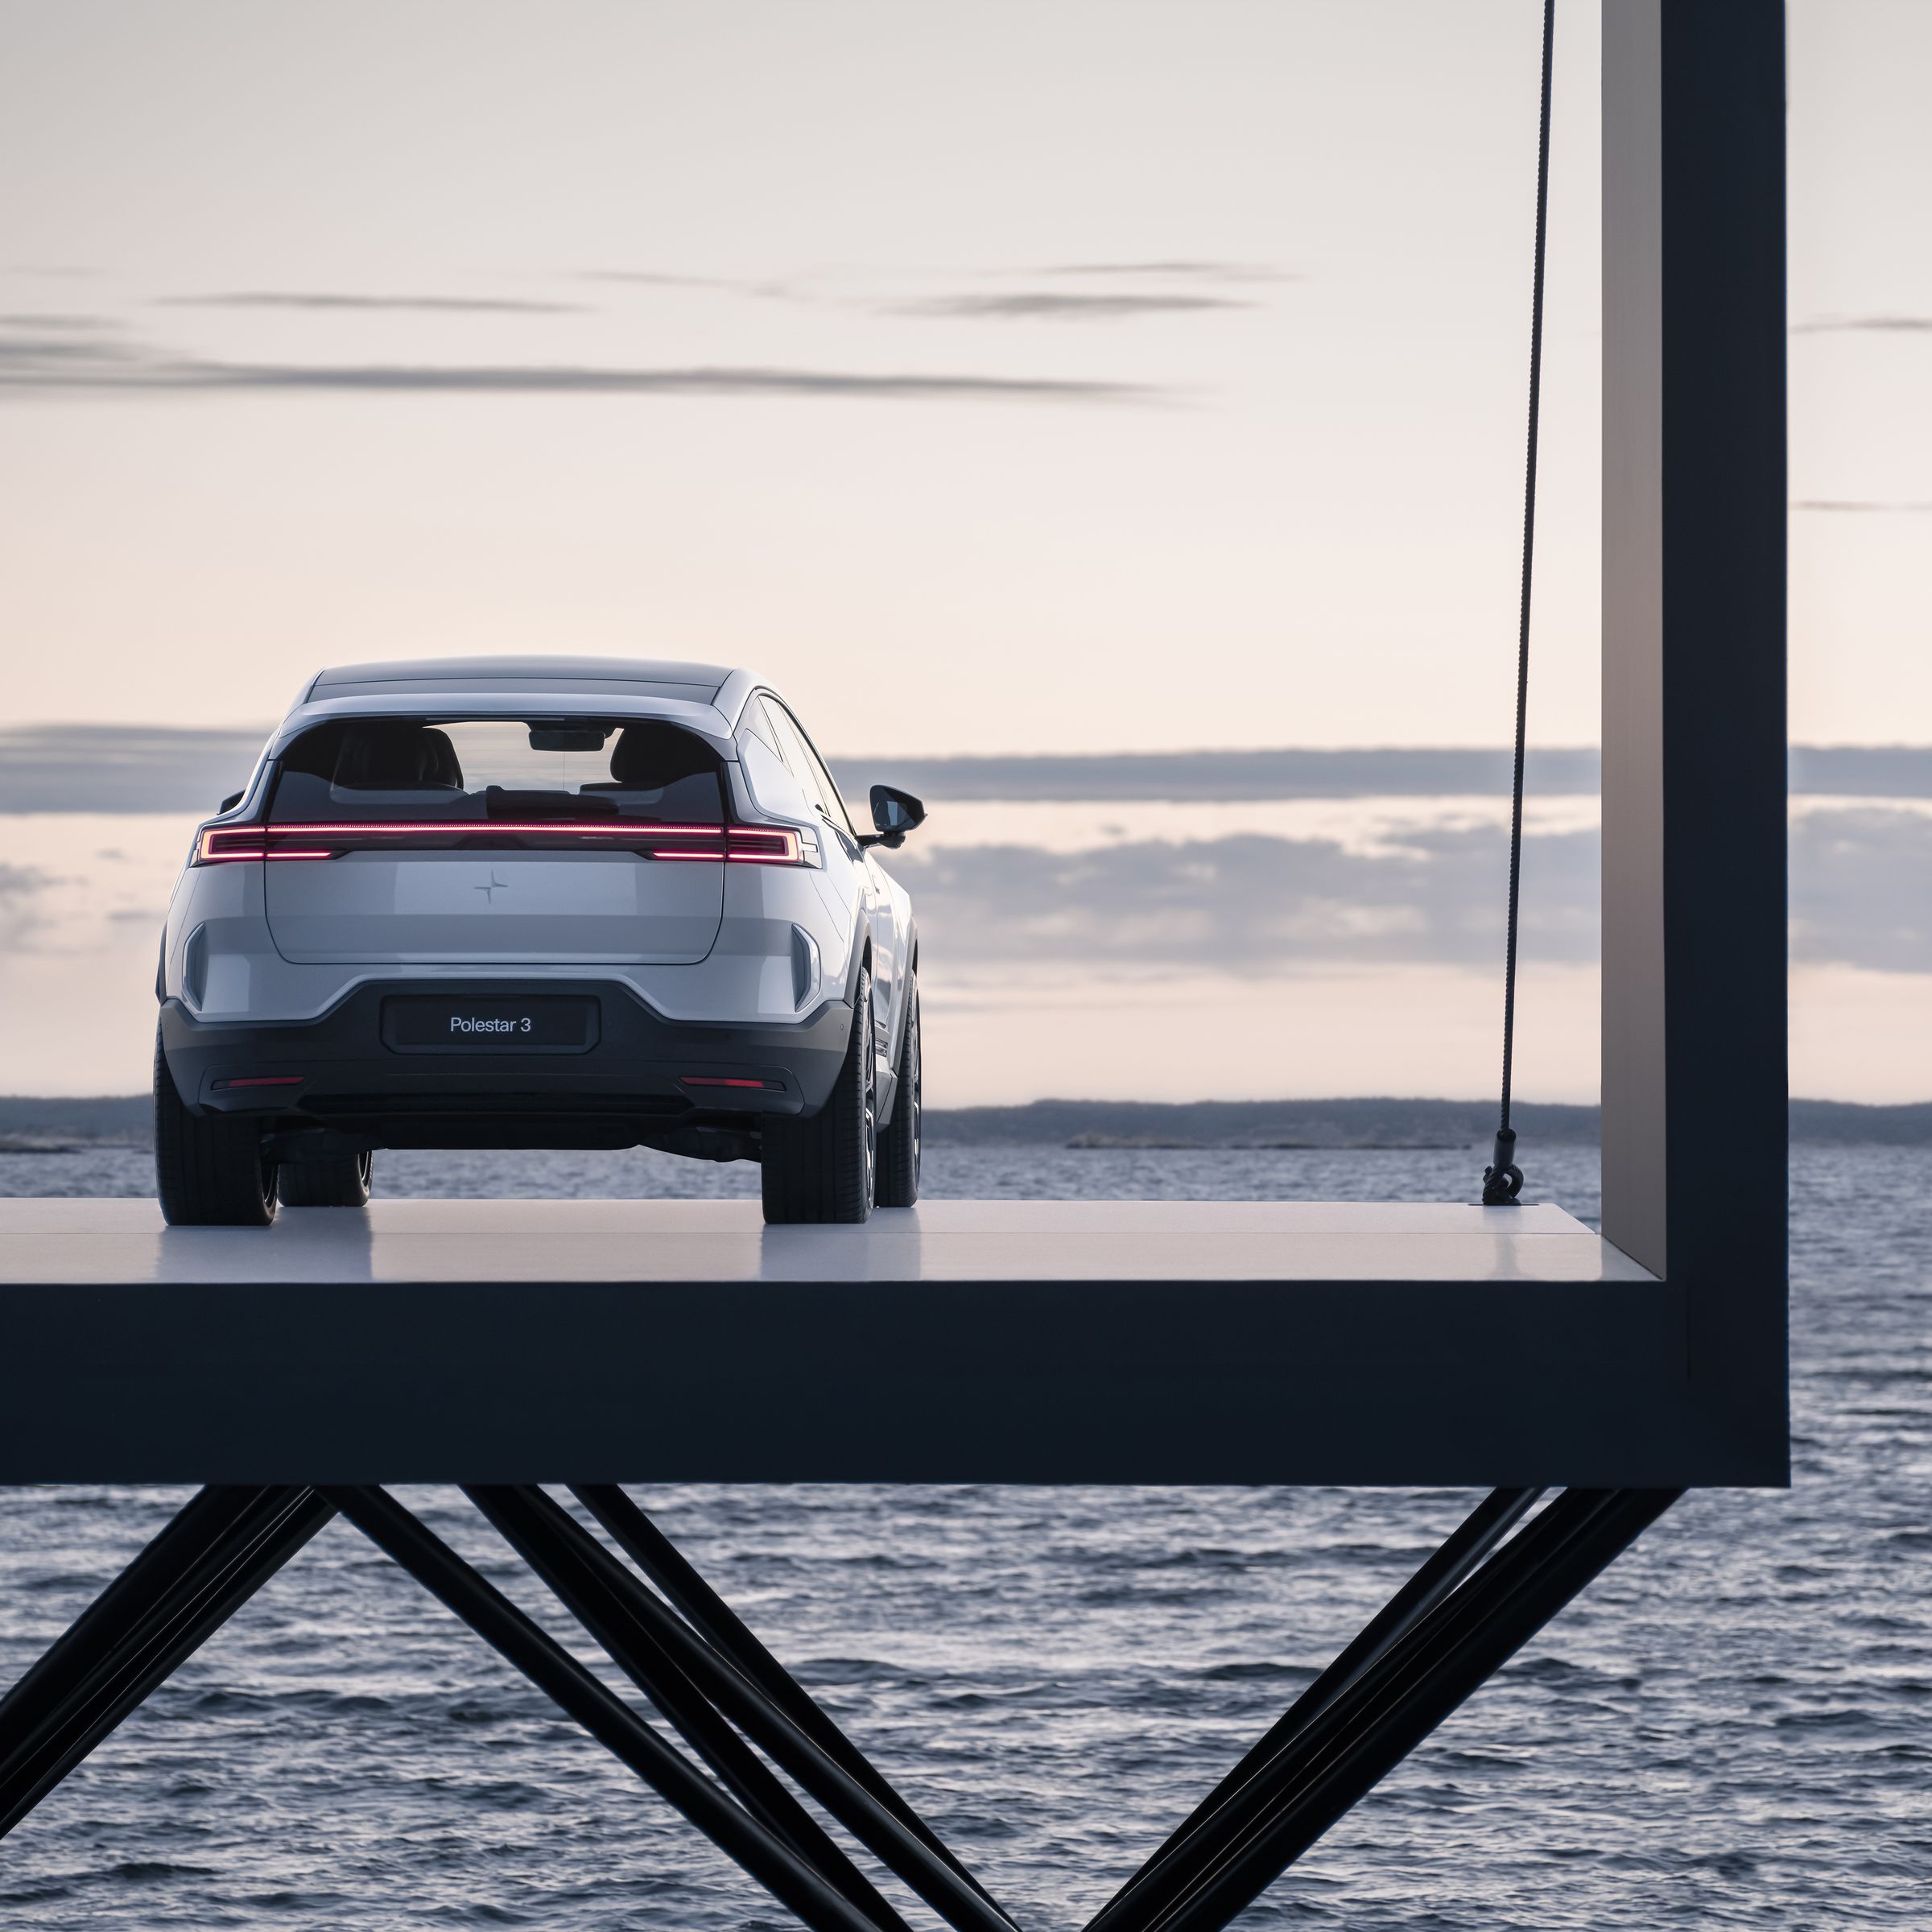 The Polestar 3 electric SUV seen from the rear parked on a pier overlooking the sea. 